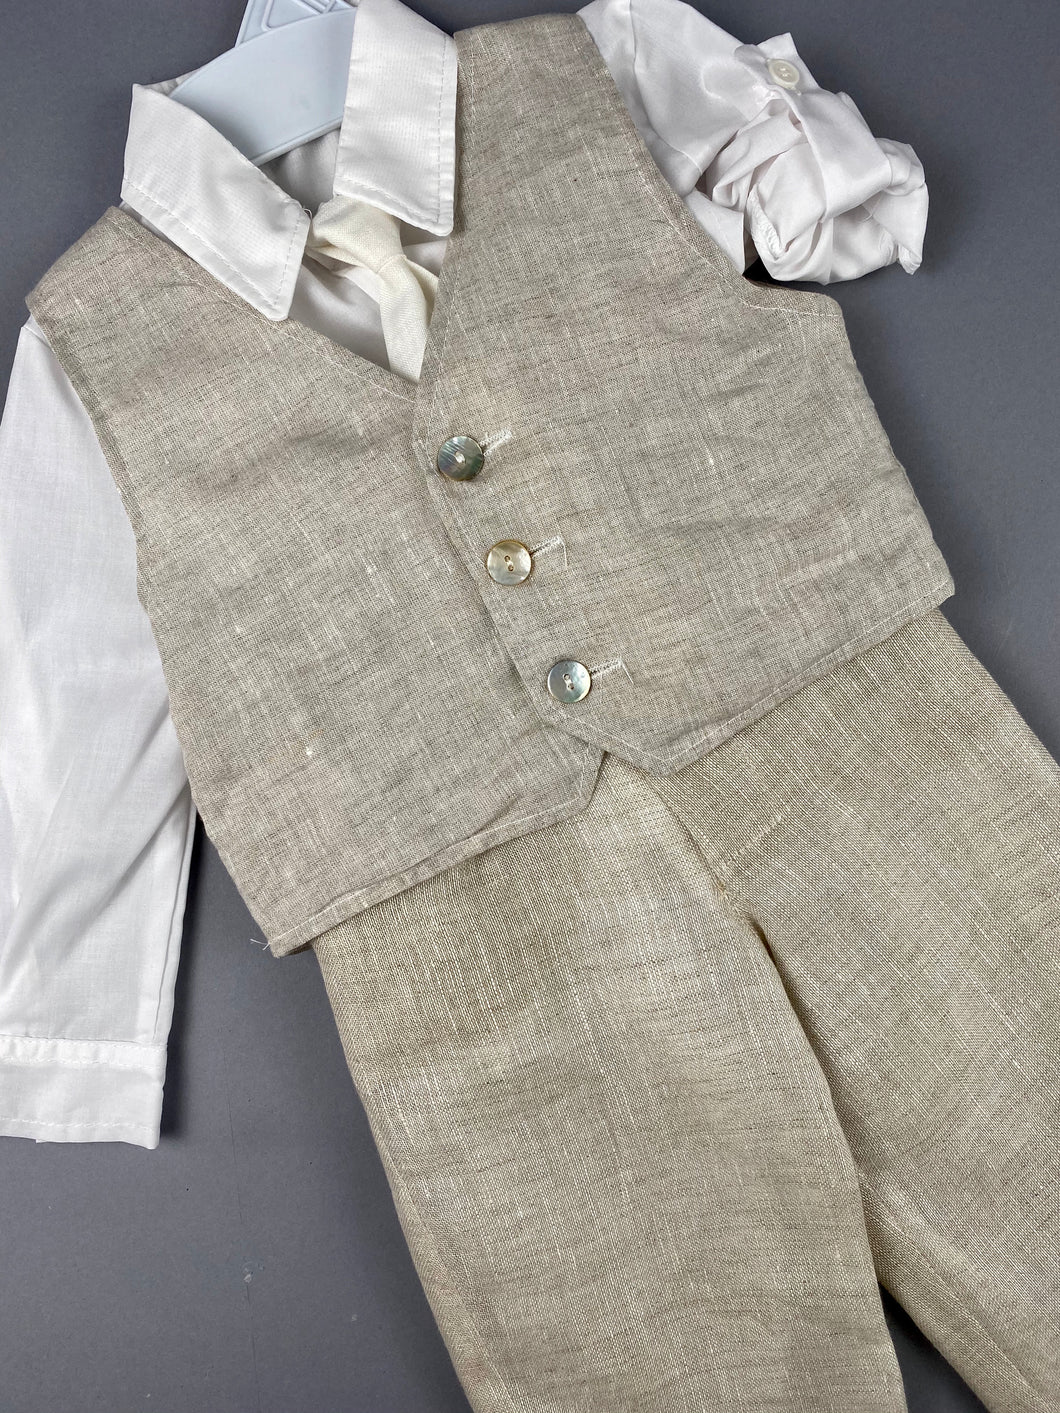 Rosies Collections 7pc full Linen suit, Dress shirt With Cuff sleeves, Pants, Jacket, Vest, Belt or Suspenders, Cap. Made in Greece exclusively for Rosies Collections S201914